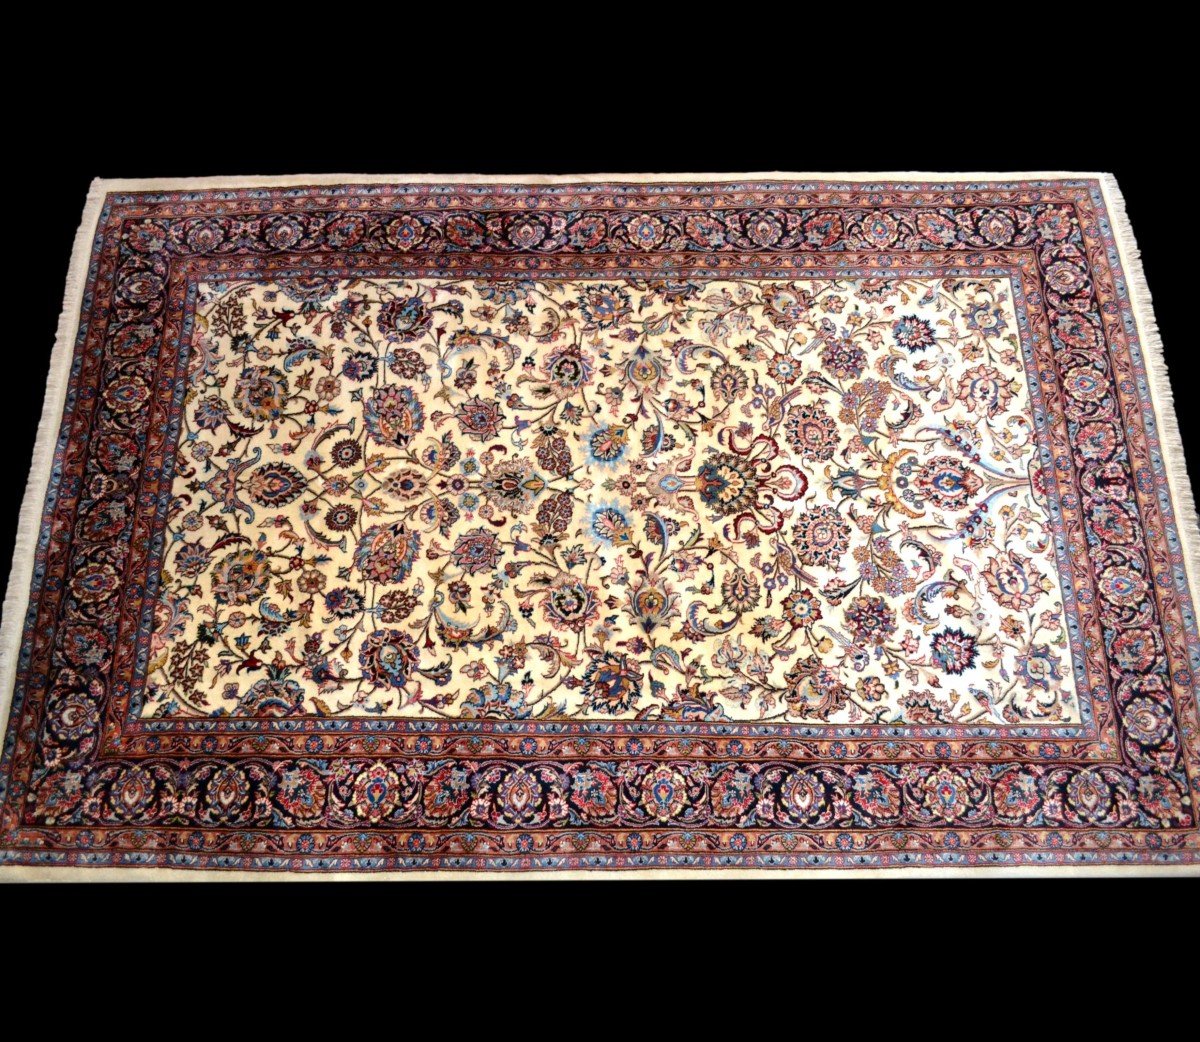 Sarough Rug, 200 Cm X 303 Cm, Hand Knotted Kork Wool In Iran Circa 1980 In Immaculate Condition-photo-3